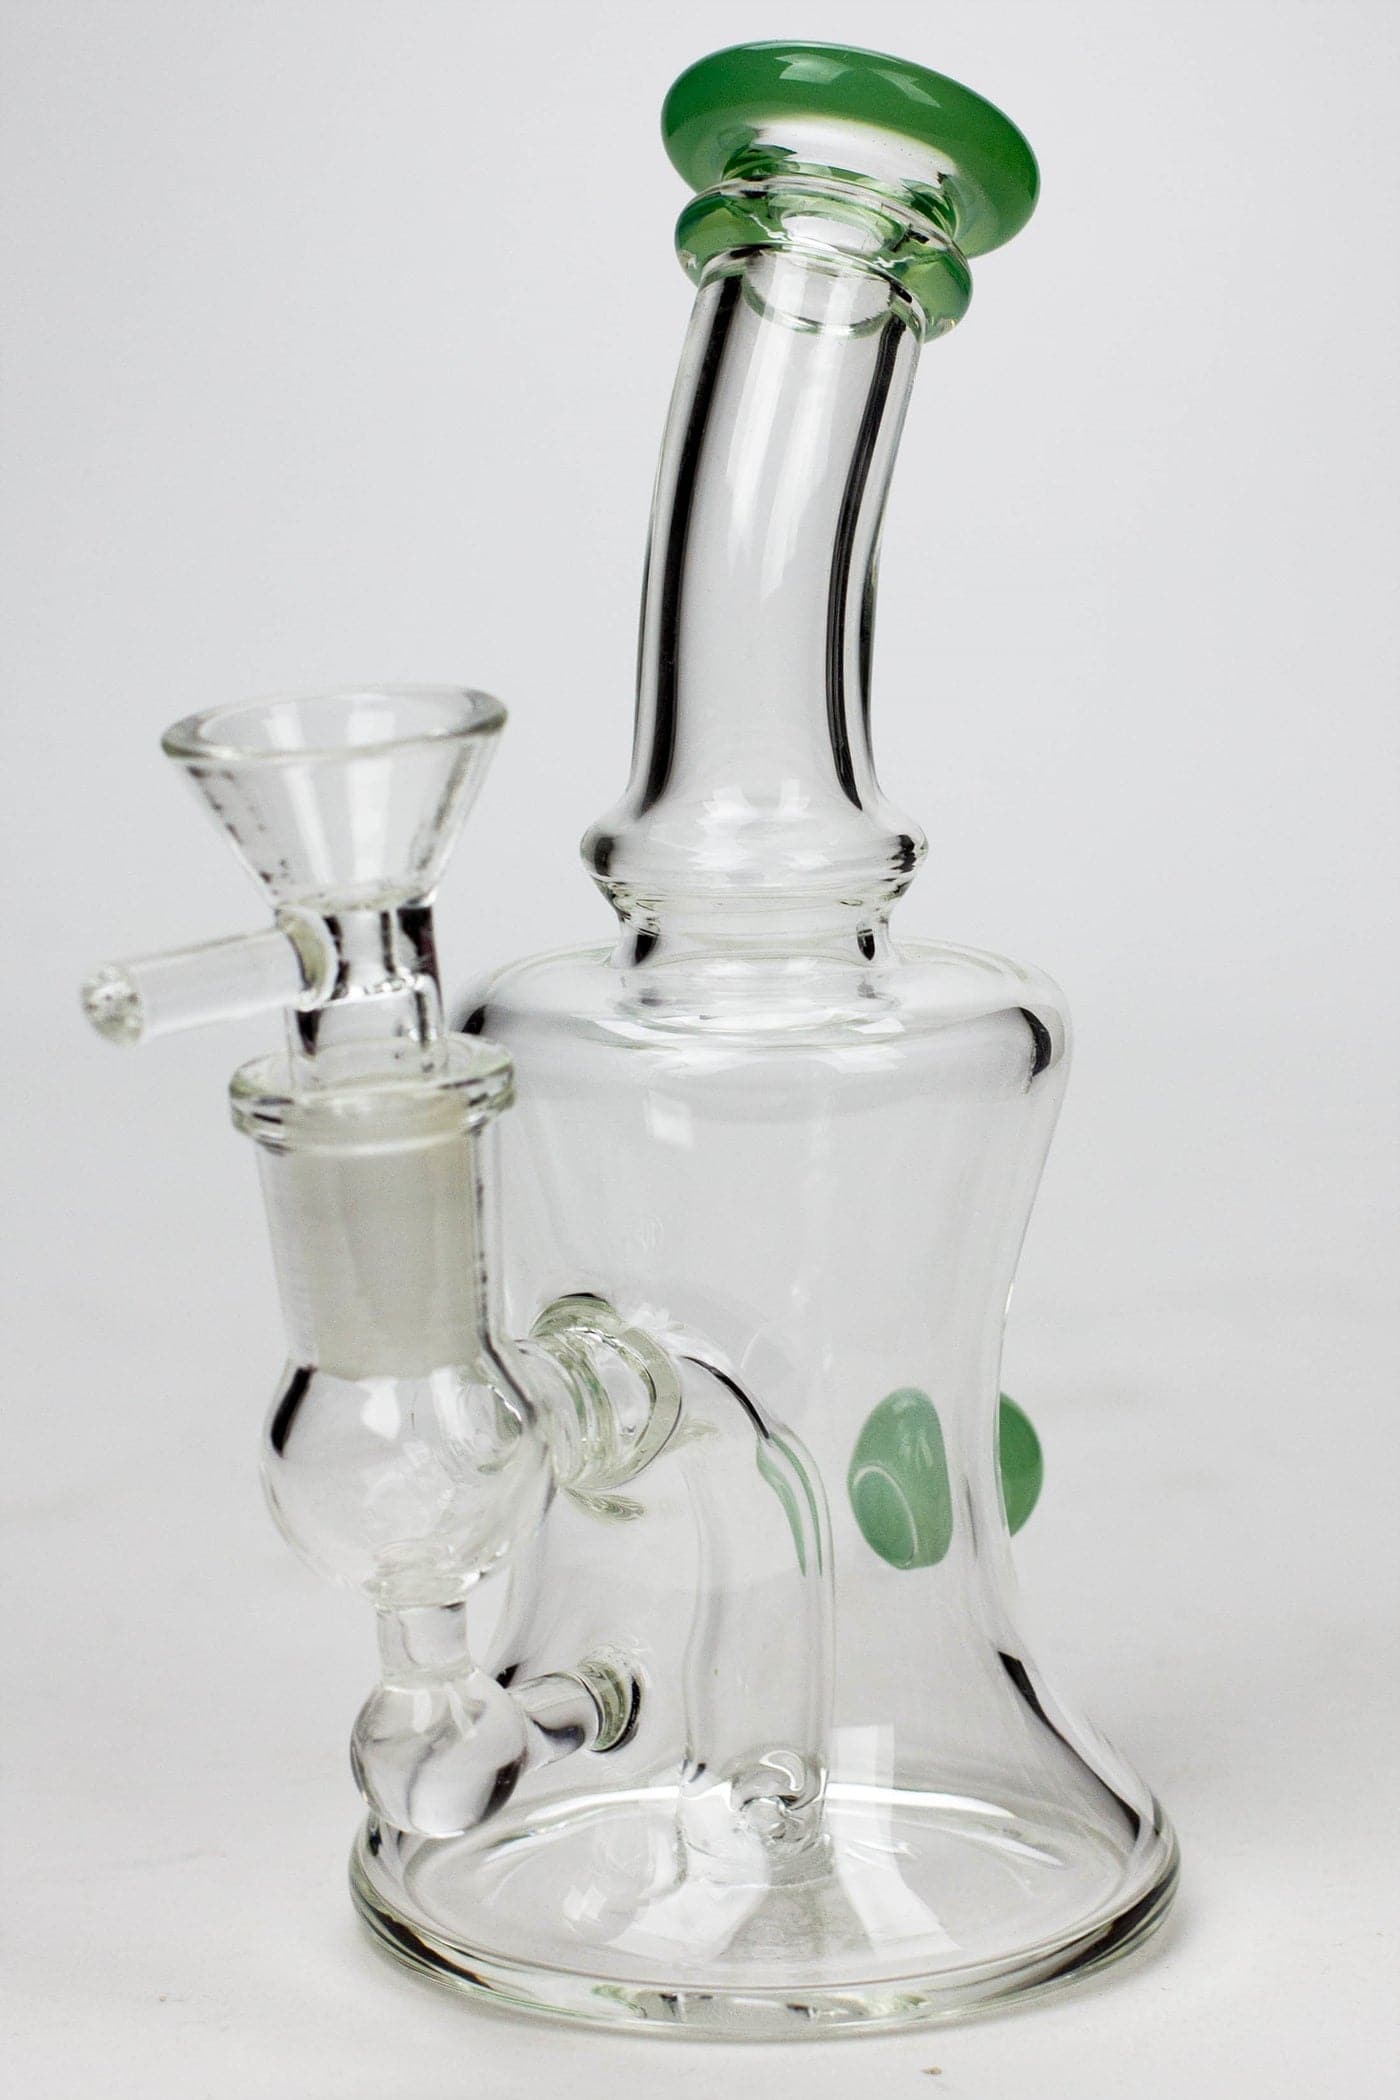 Fixed 3 hole diffuser skirt bubbler_9